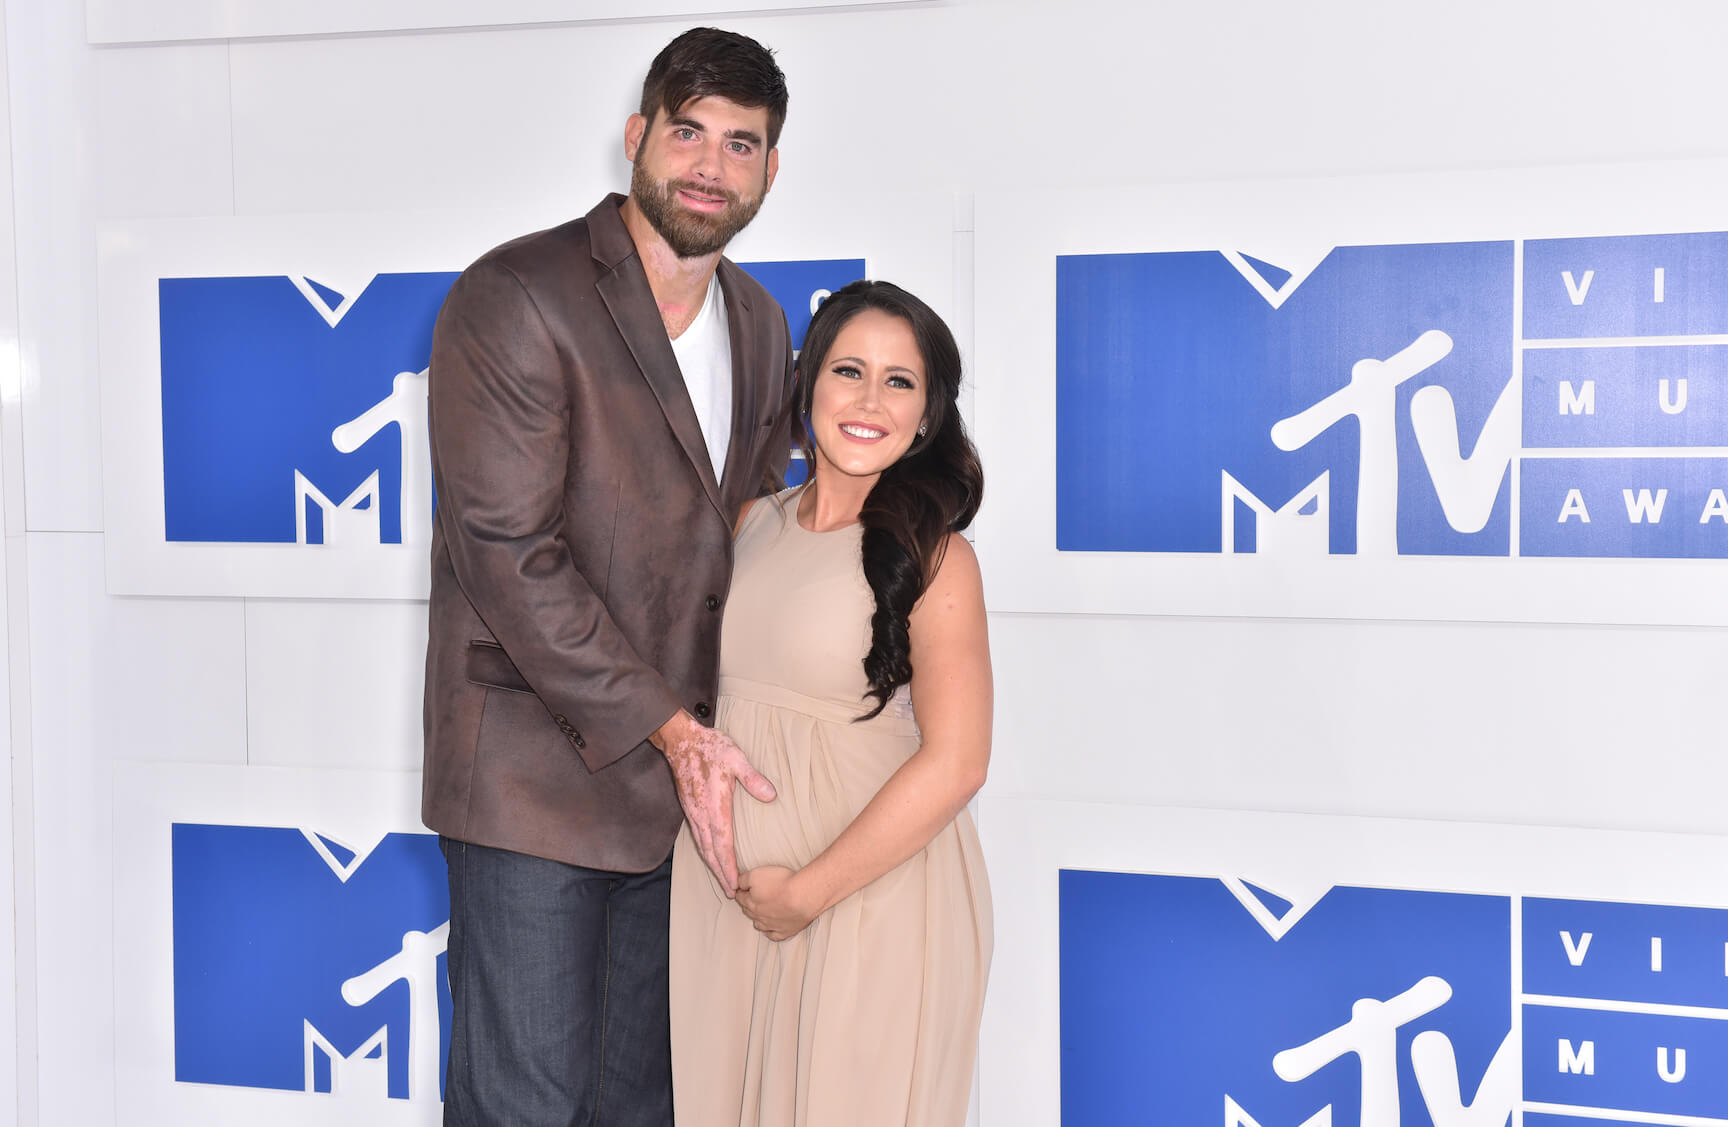 'Teen Mom 2' stars Jenelle Evans and David Eason at the 206 MTV Video Music Awards. Jenelle is cradling a baby bump.